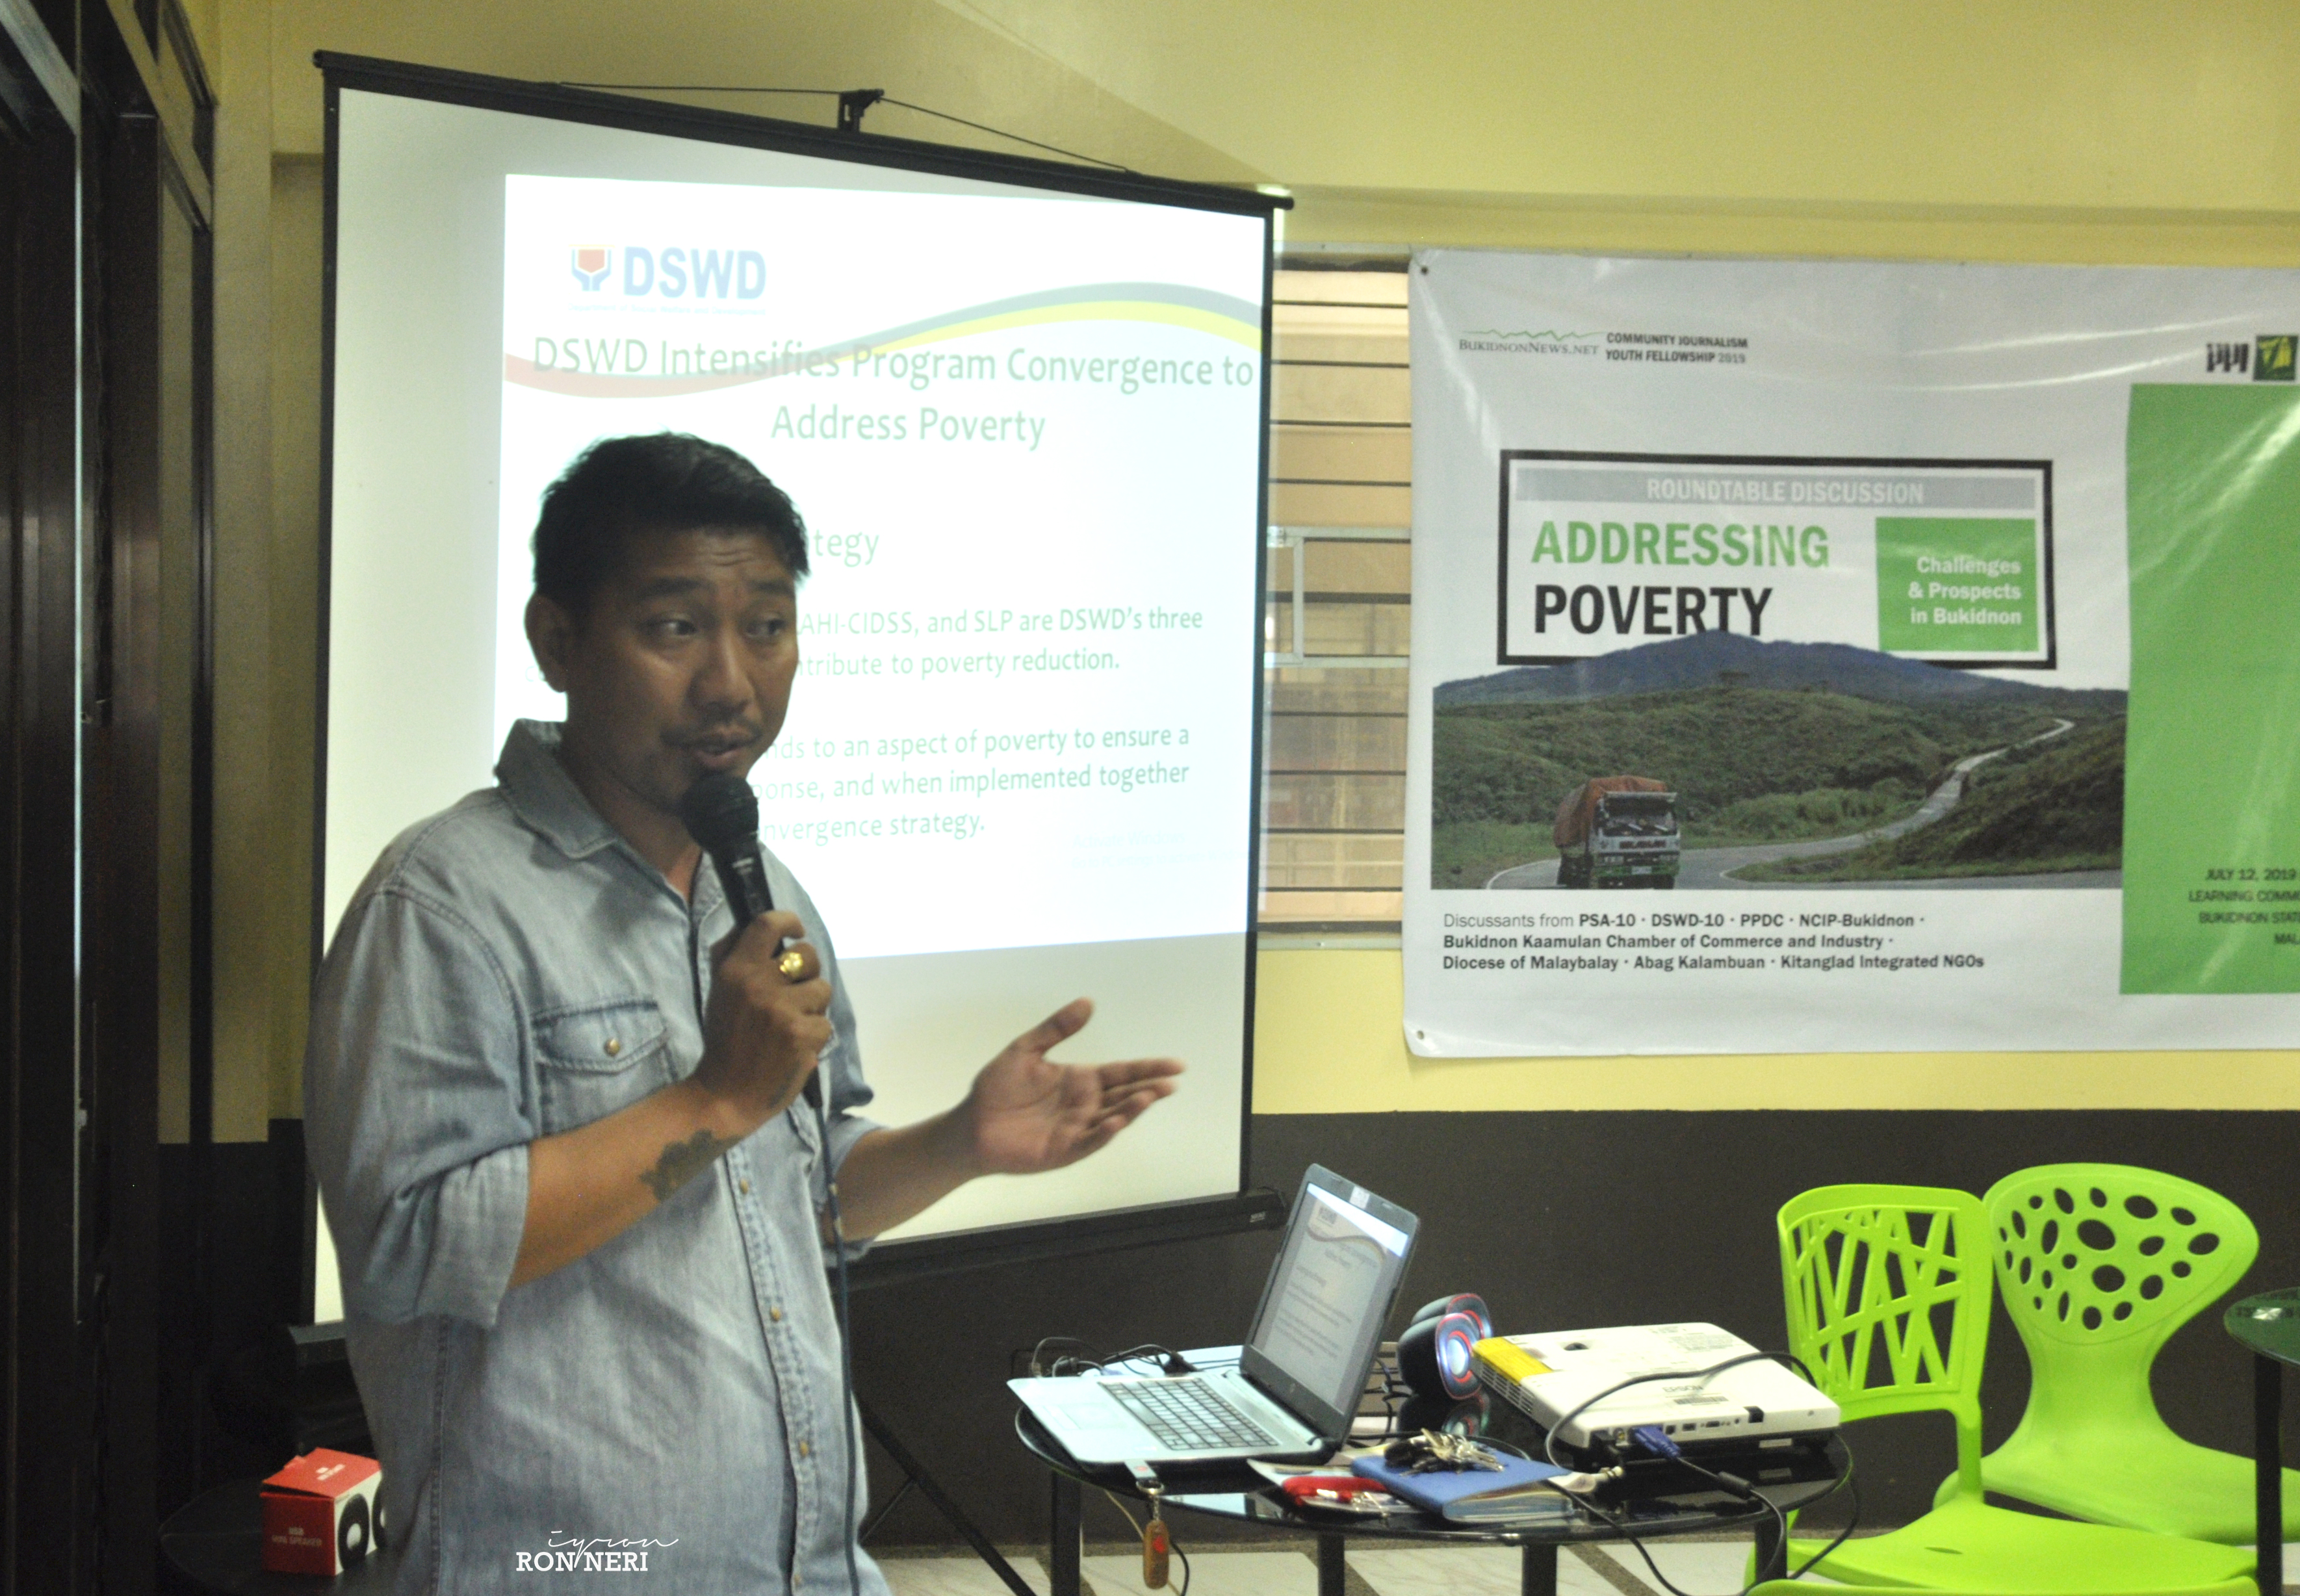 Mr. Christopher Capinpin of DSWD-10 Bukidnon Office speaks during the Round Table Discussion on Addressing Poverty in Bukidnon: Challenges and Prospects held at the Bukidnon State University Learning Commons on July 12, 2019. The RTD was initiated by BukidnonNews.Net in partnership with the Bukidnon Studies Center and the CAS-Social Sciences Department of Bukidnon State University.  BukidnonNews.Net photo by Ronald Christopher G. Neri